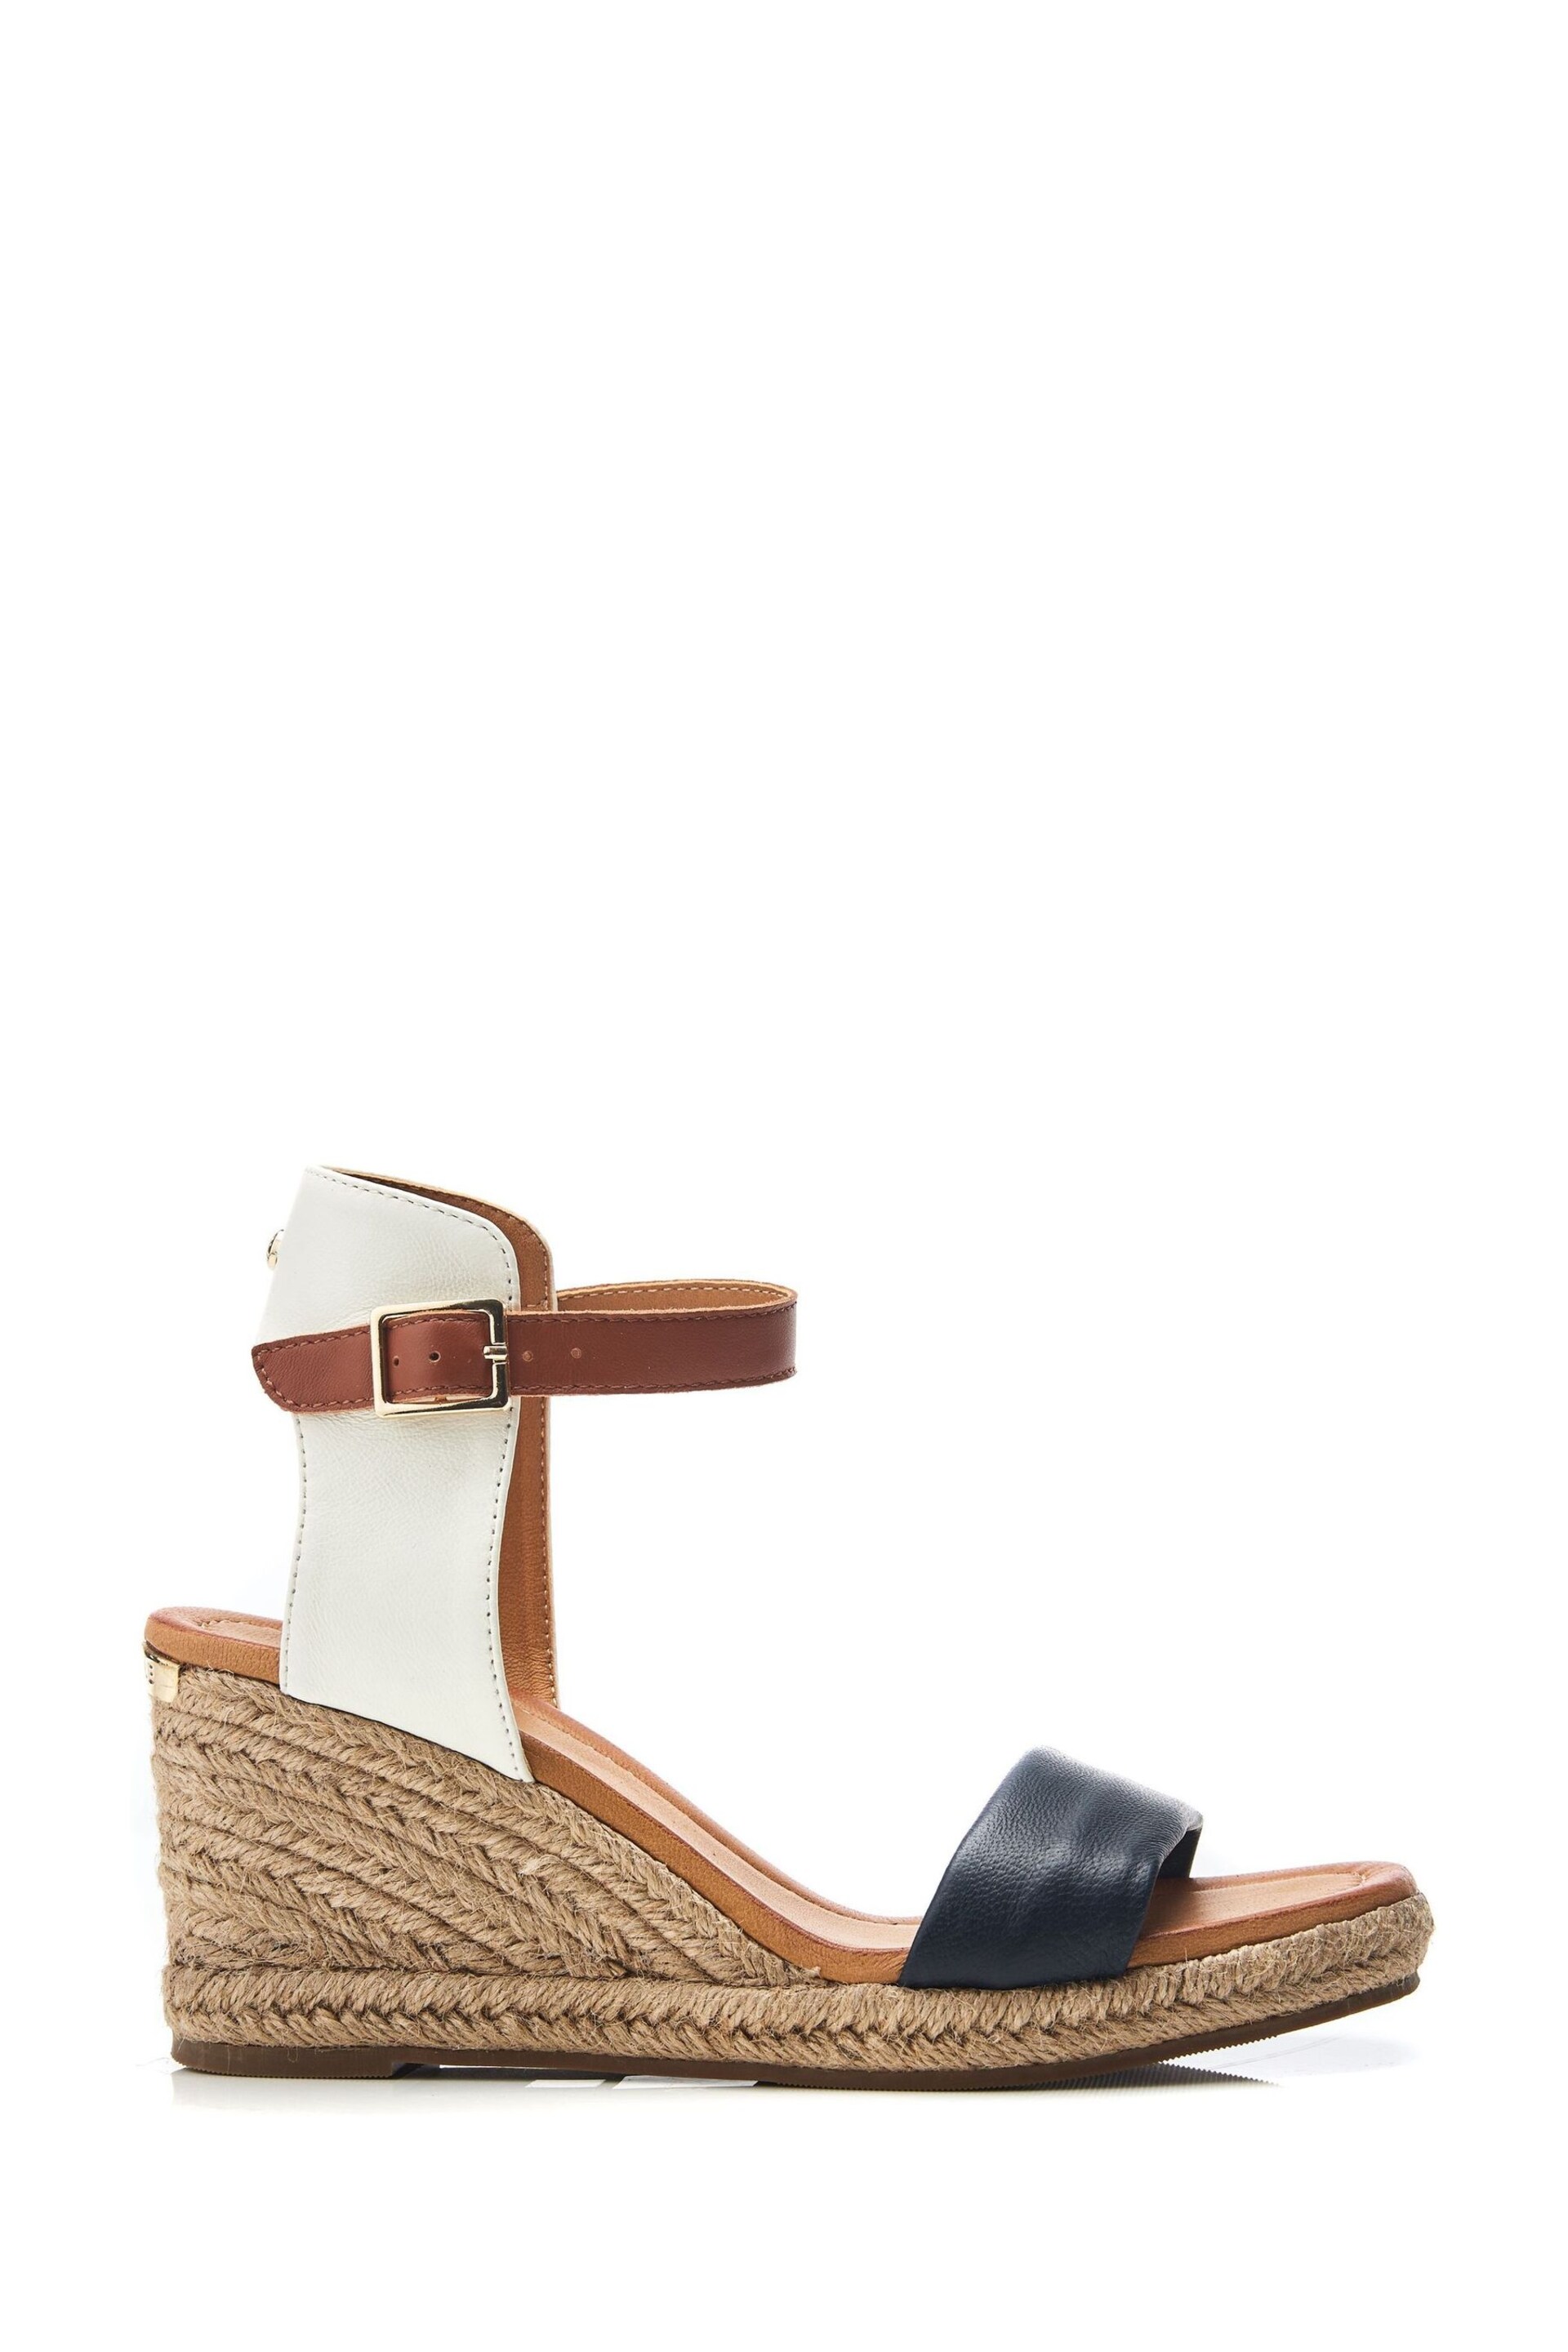 Moda in Pelle Phyllis Square Toe Two Strap Wedge Sandals - Image 1 of 4